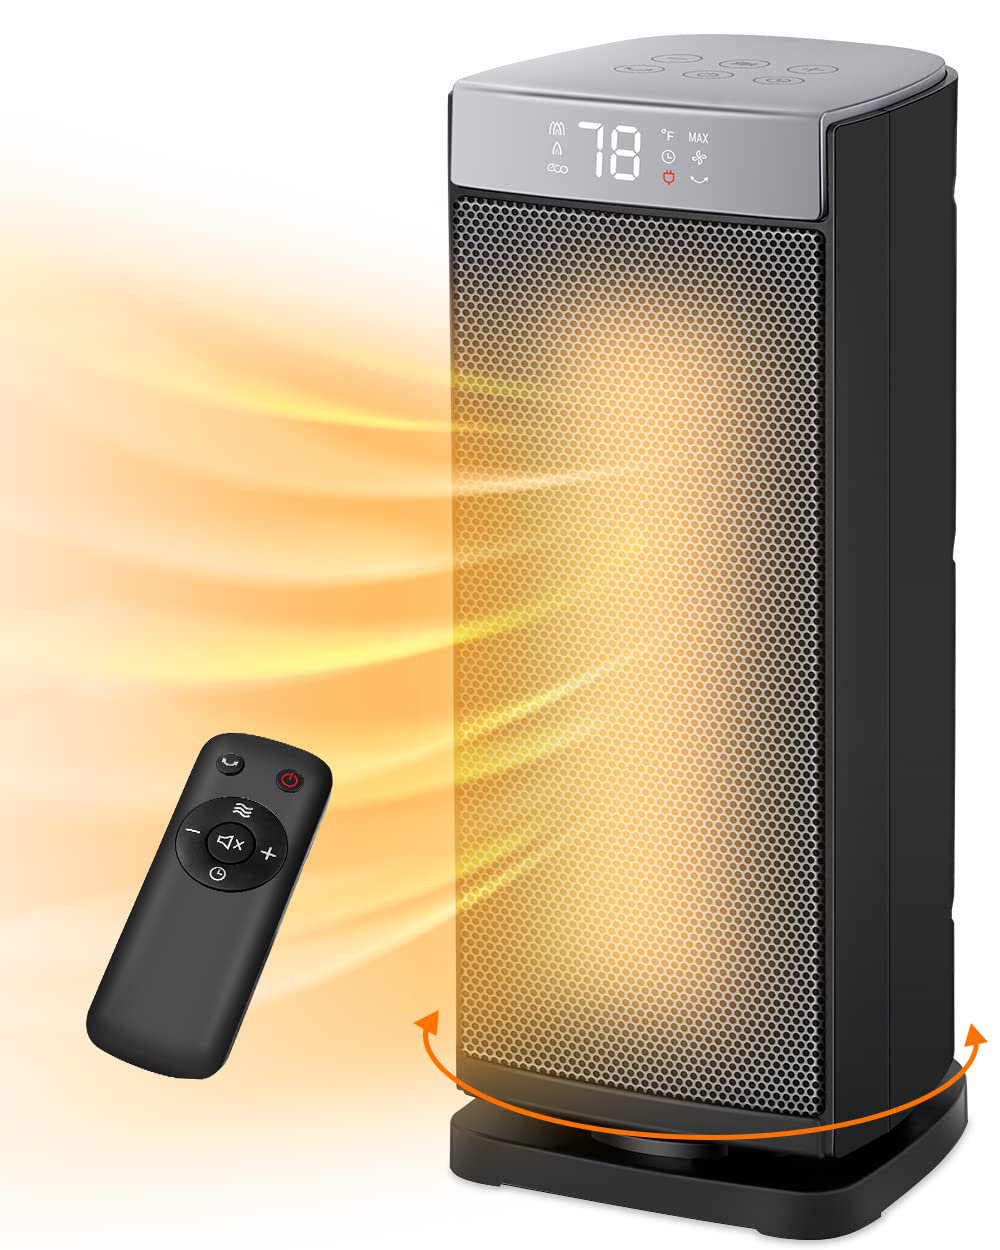 Dreo 5118 BTU BTU Electric Tower Space Heater with Adjustable Thermostat , Remote Included Dreo